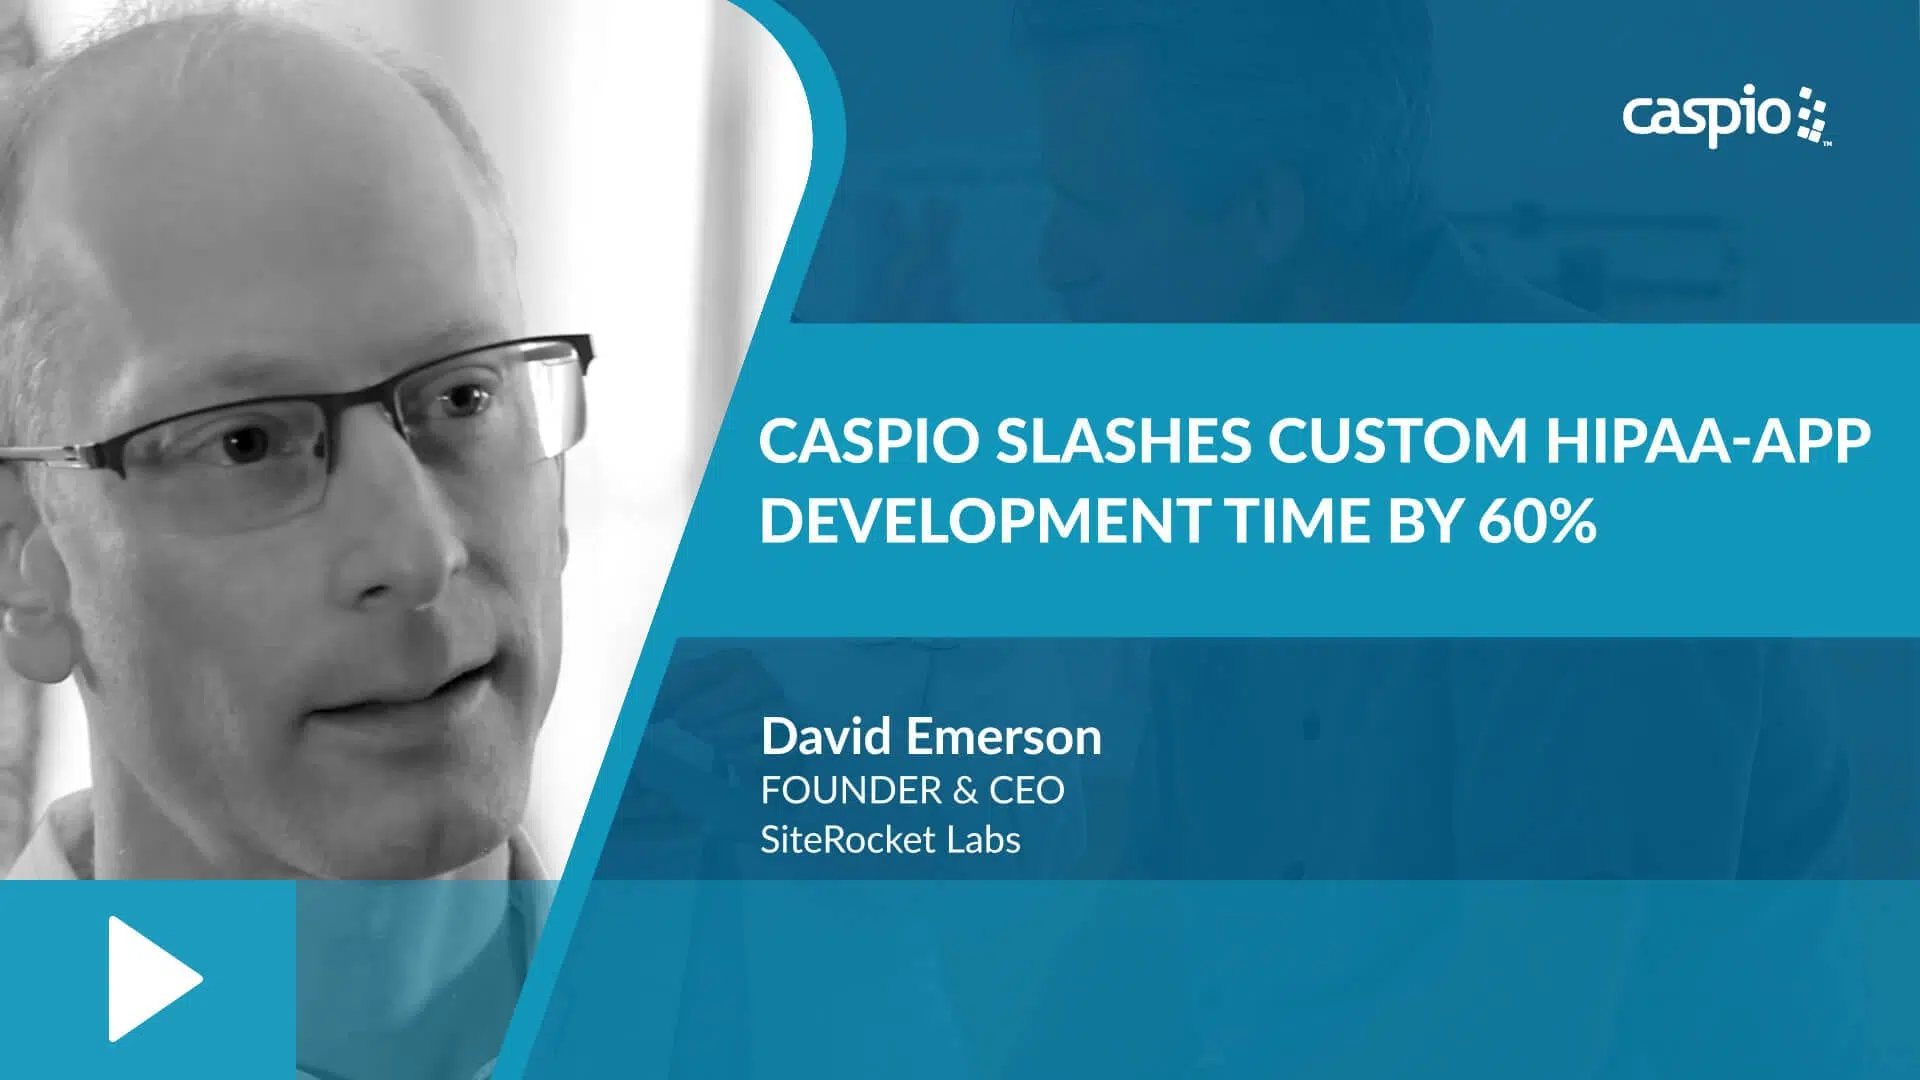 Caspio Provides Industry-Leading Features to Meet Your Unique Healthcare Management Needs